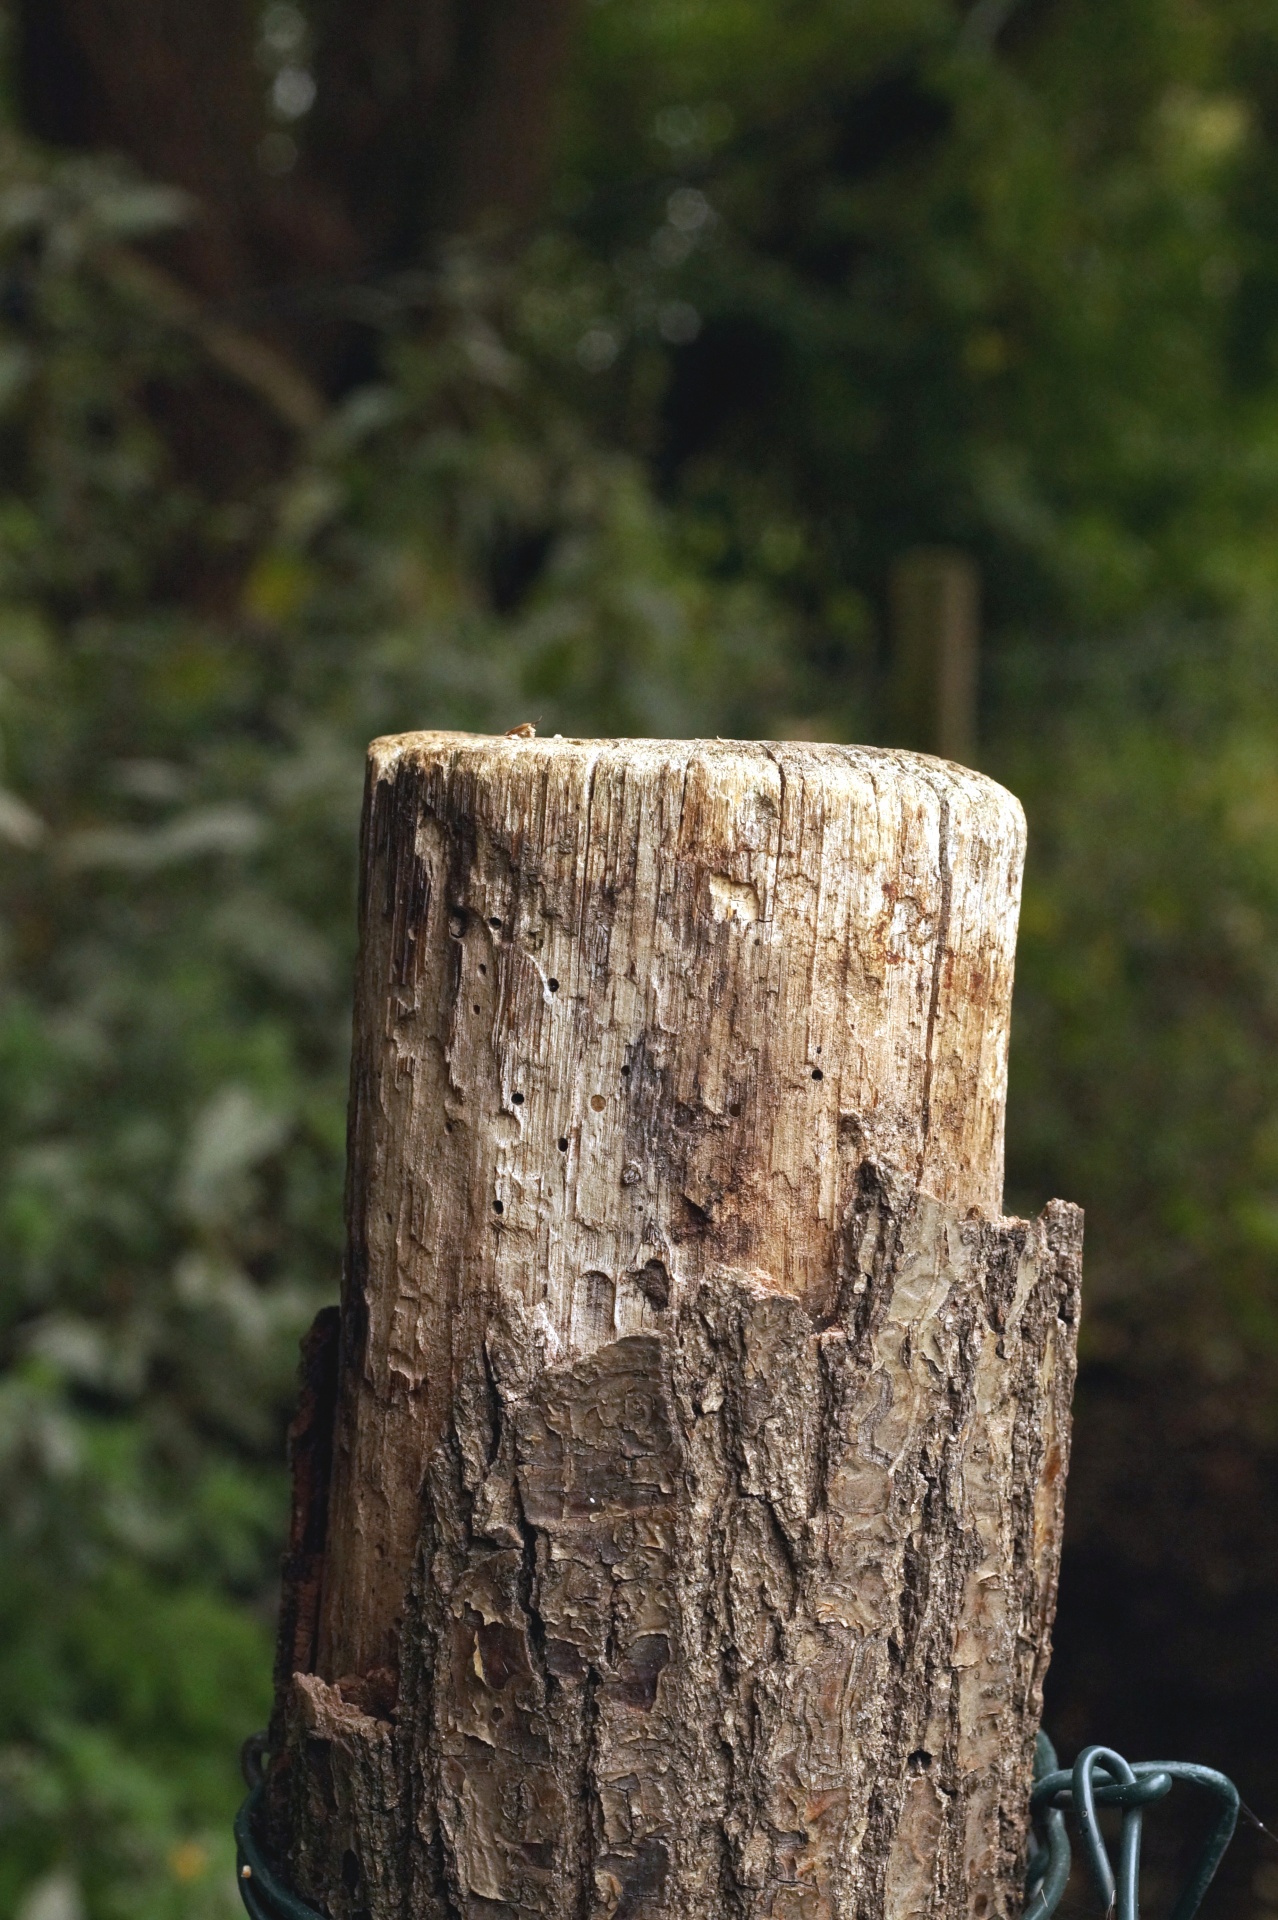 Wood post stake fence post wooden post bark trunk